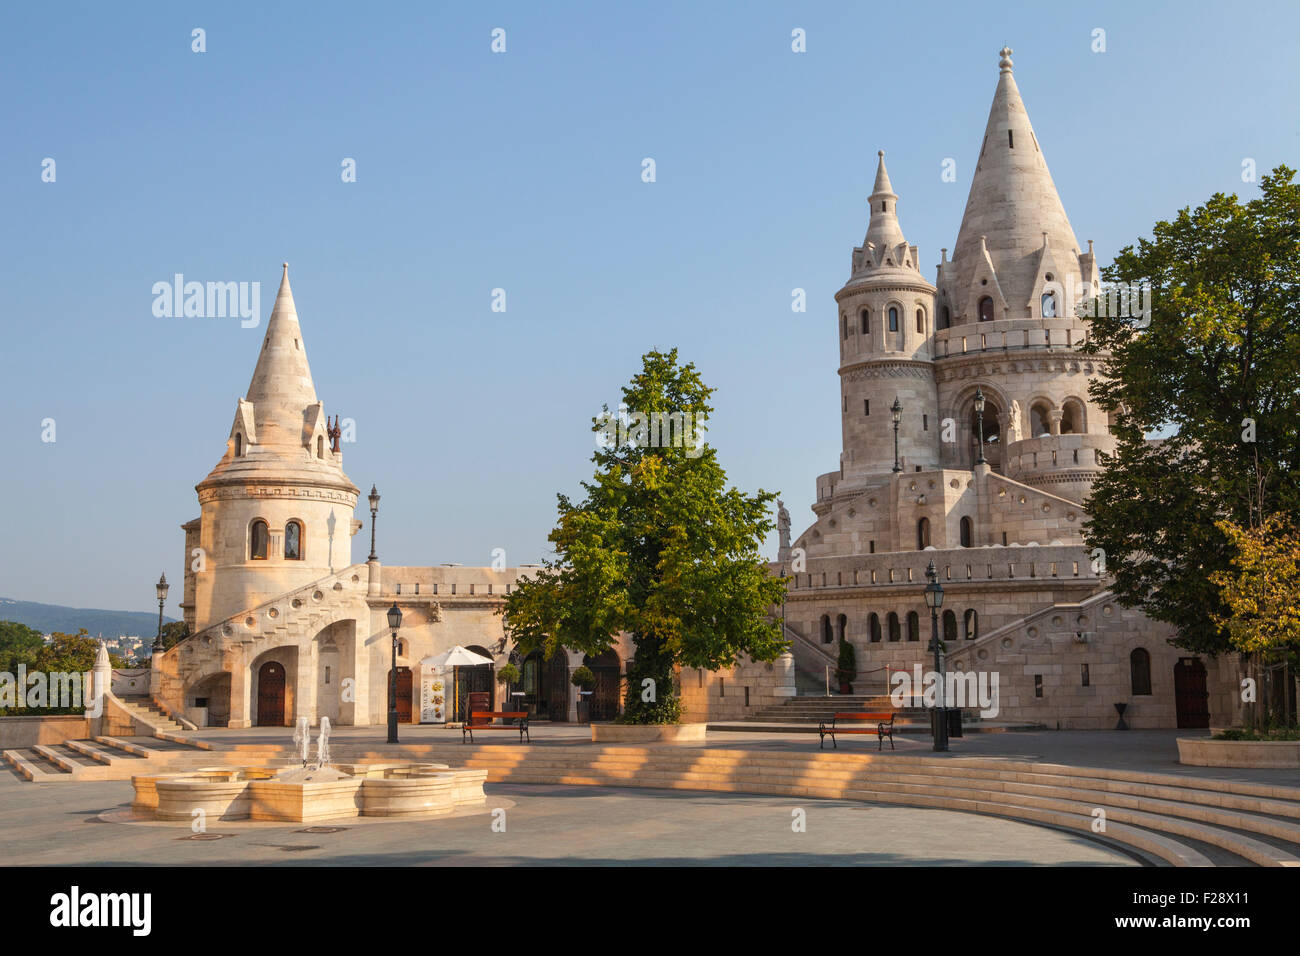 The historic Fisherman’s Bastion in Budapest, Hungary. Stock Photo